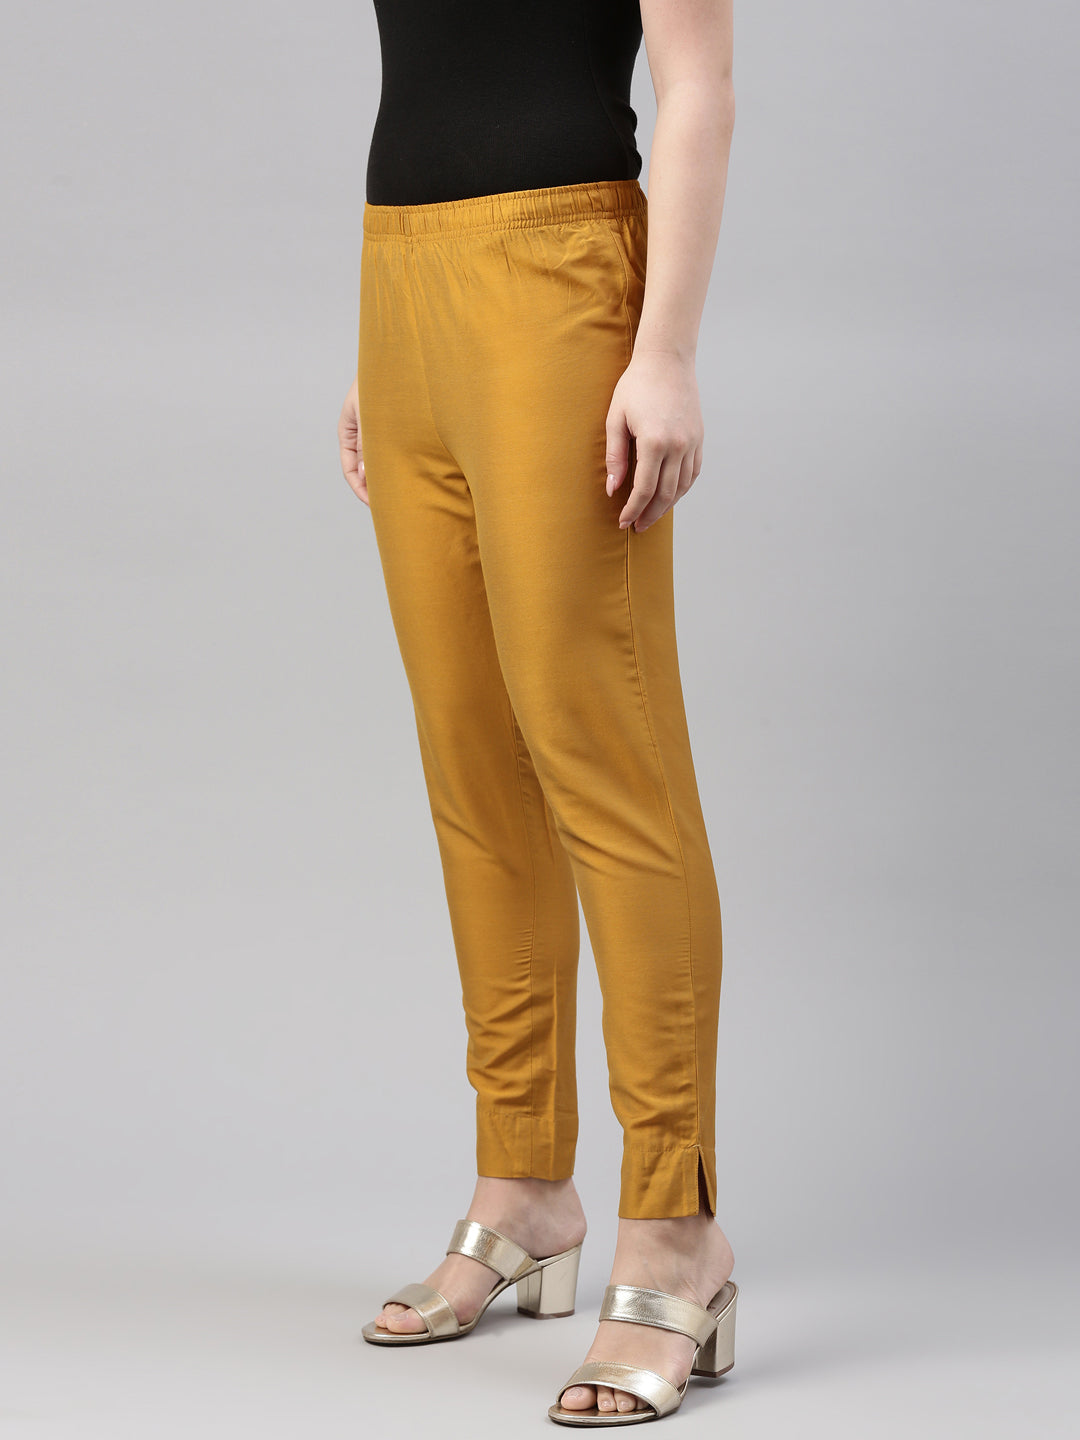 Yellow Color Simple Cotton Fabric Ladies Trousers For Casual And Formal  Wear Decoration Material Cloths at Best Price in Surat  Ap Agency